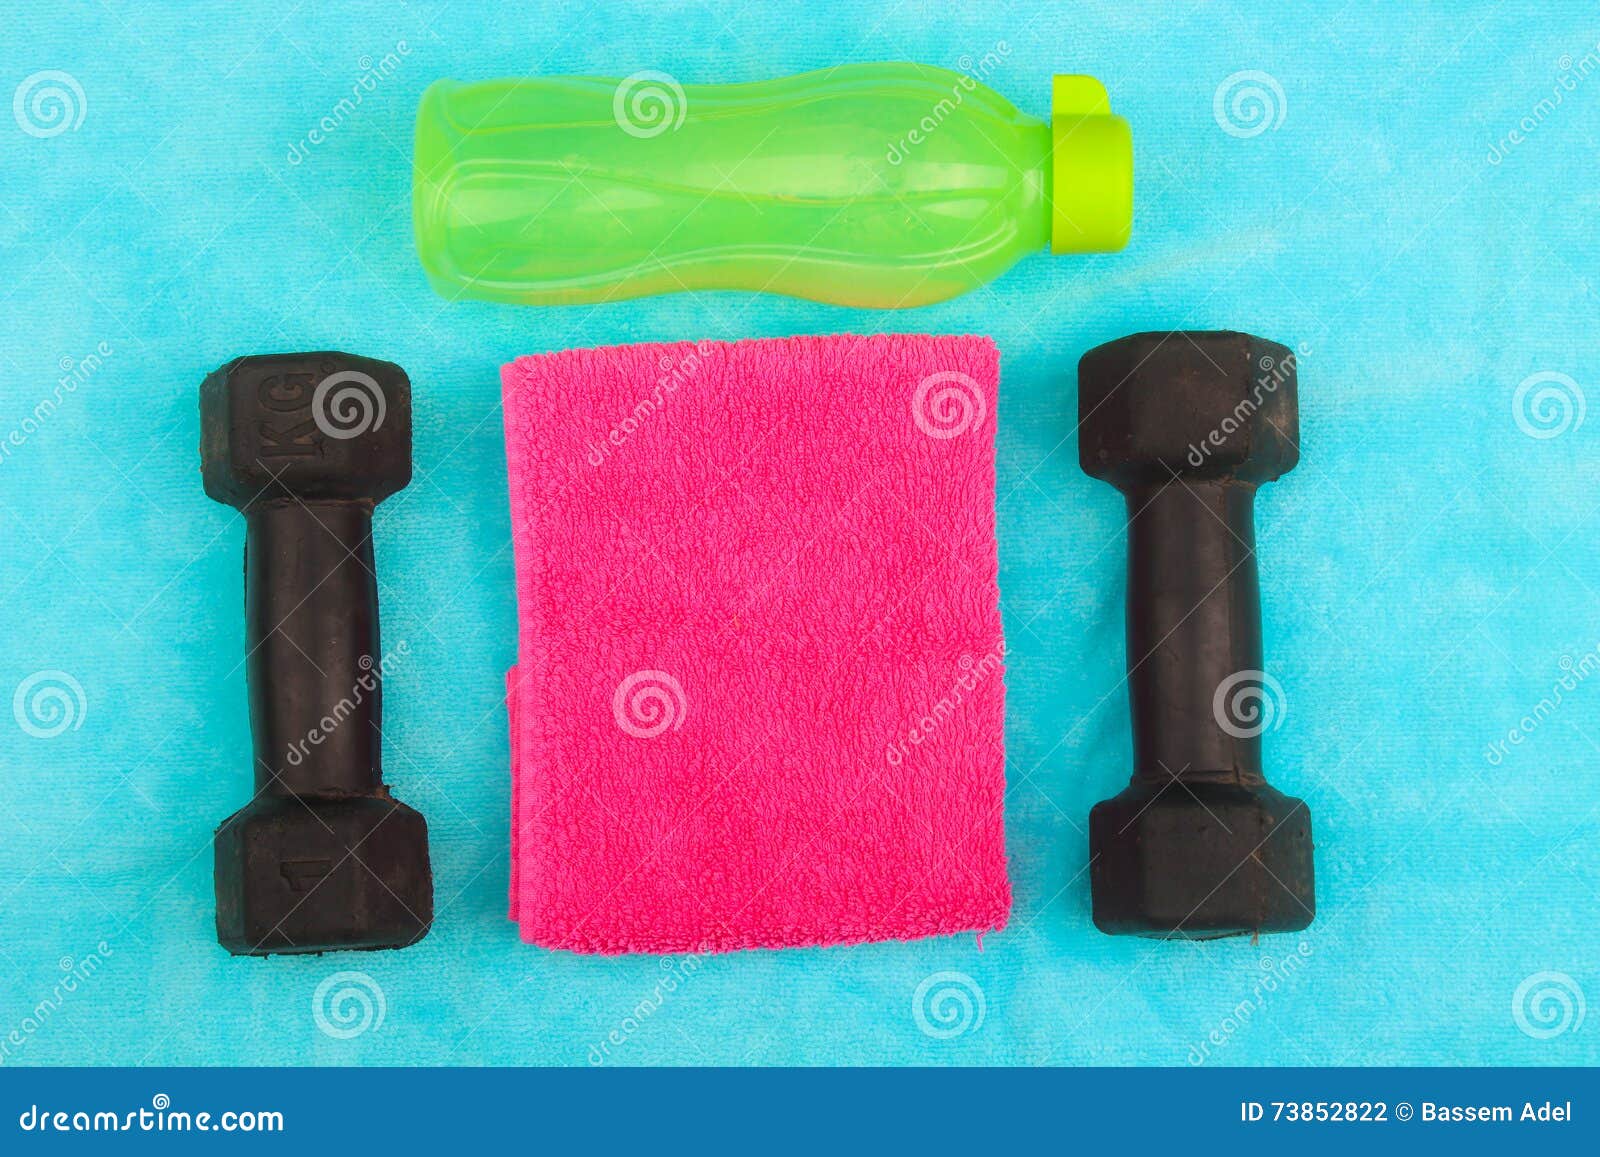 Gym Gear, Gym Clothes and Sports Wear Kit Stock Photo - Image of ...